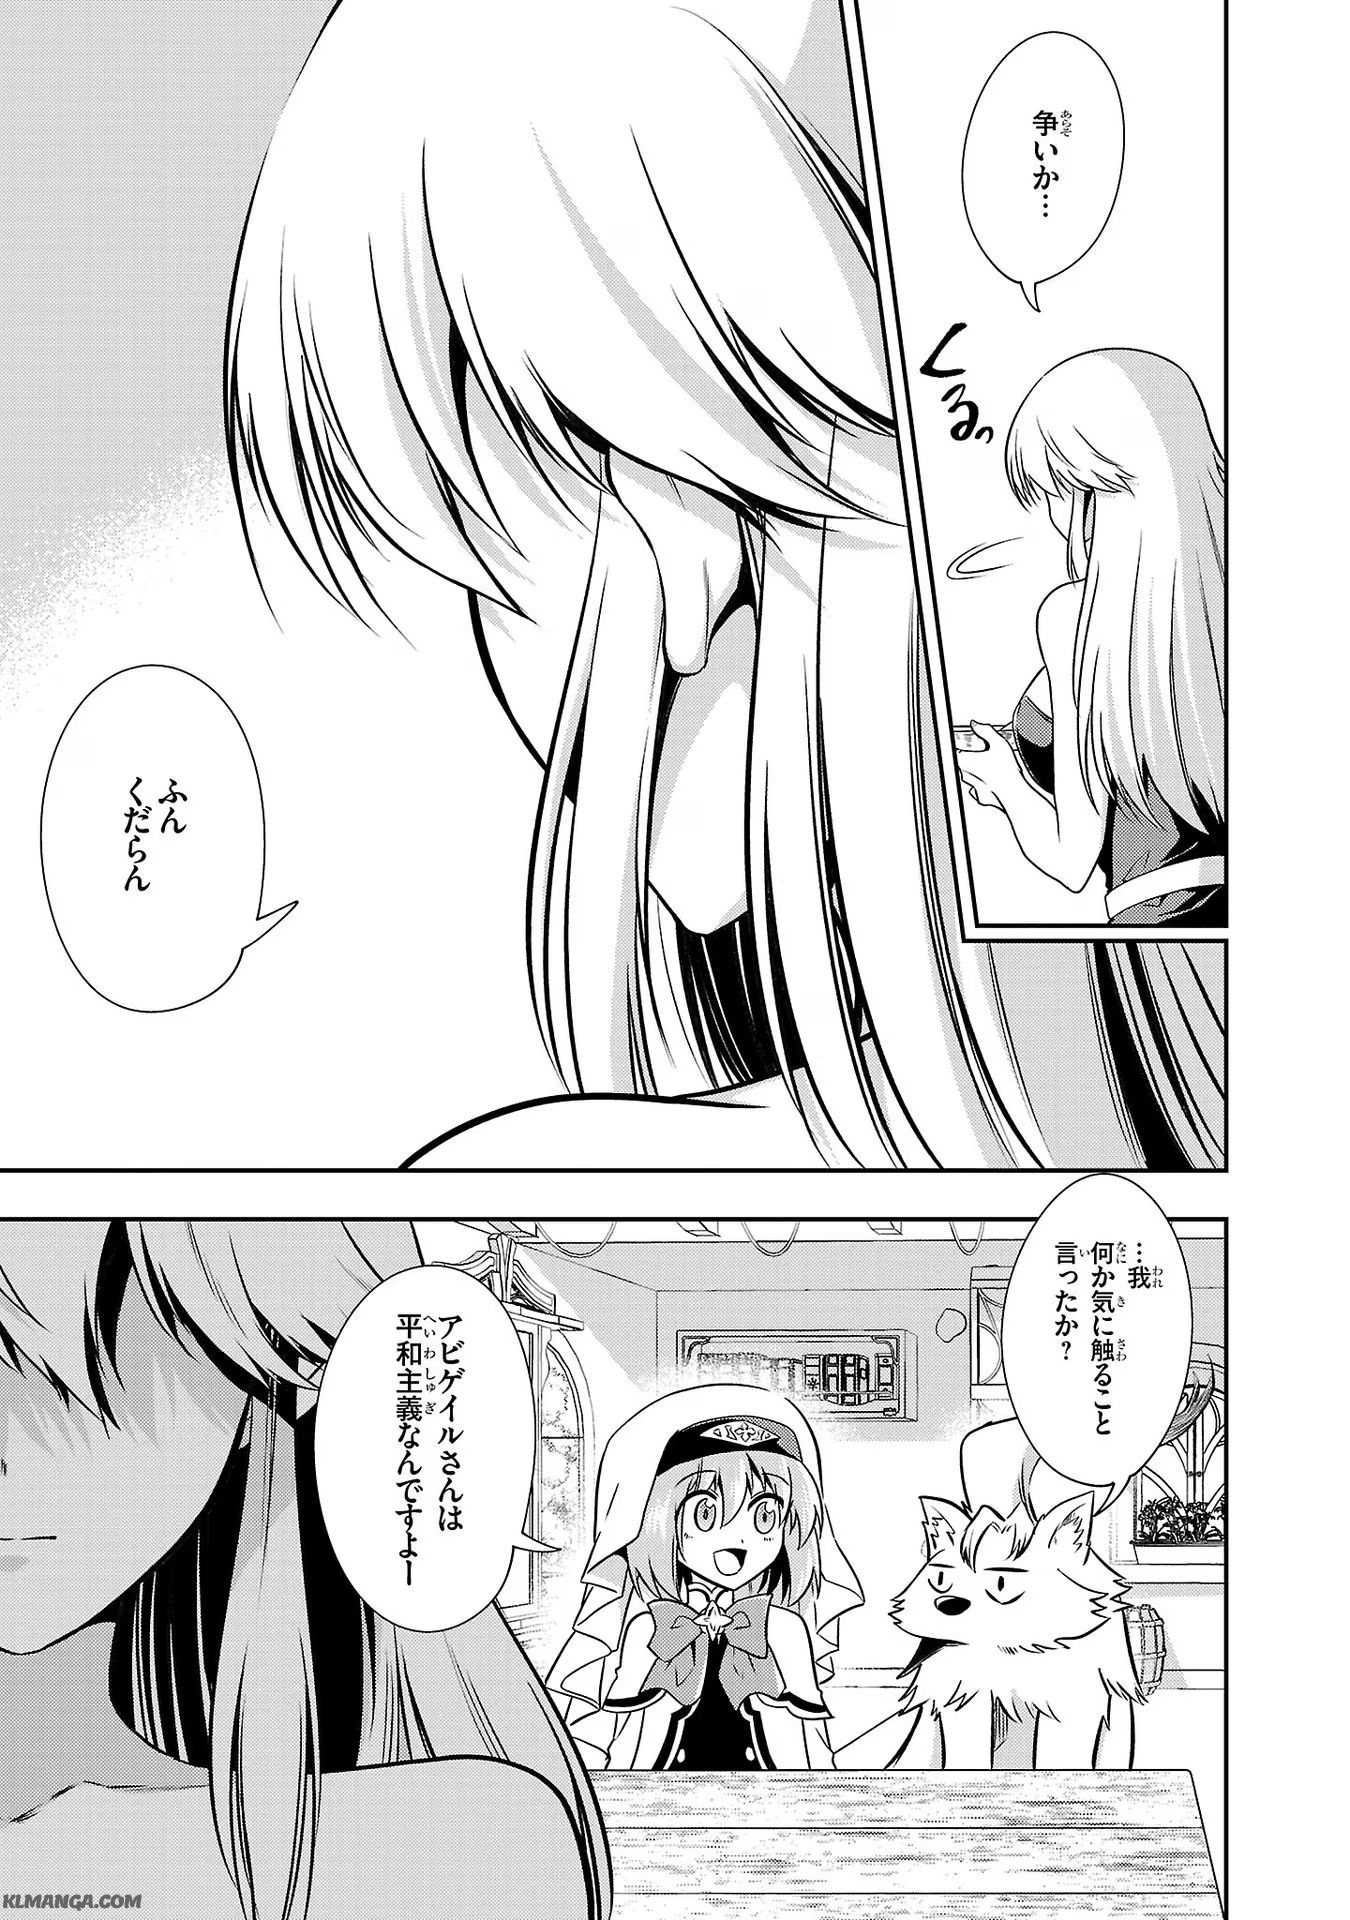 Hungry Saint and Full-Stomach Witch’s Slow Life in Another World! 腹ペコ聖女とまんぷく魔女の異世界スローライフ! 第13話 - Page 9